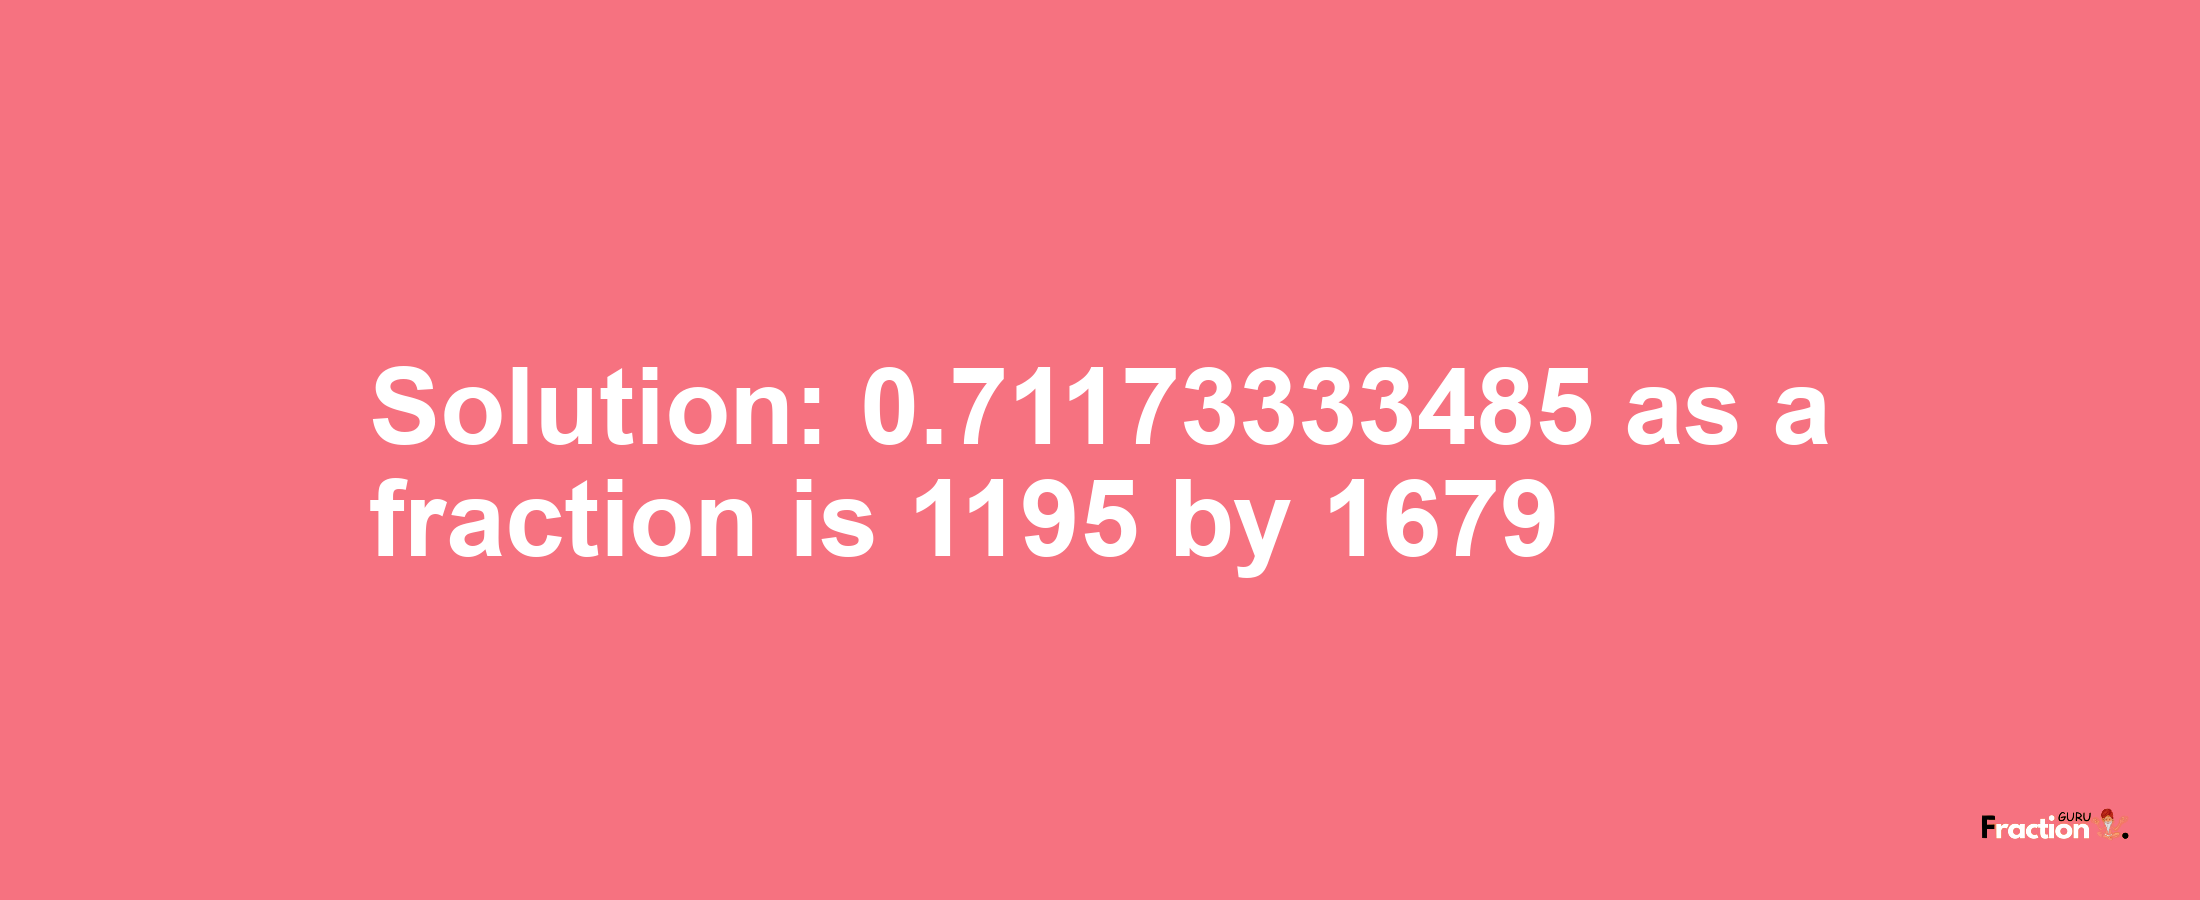 Solution:0.71173333485 as a fraction is 1195/1679